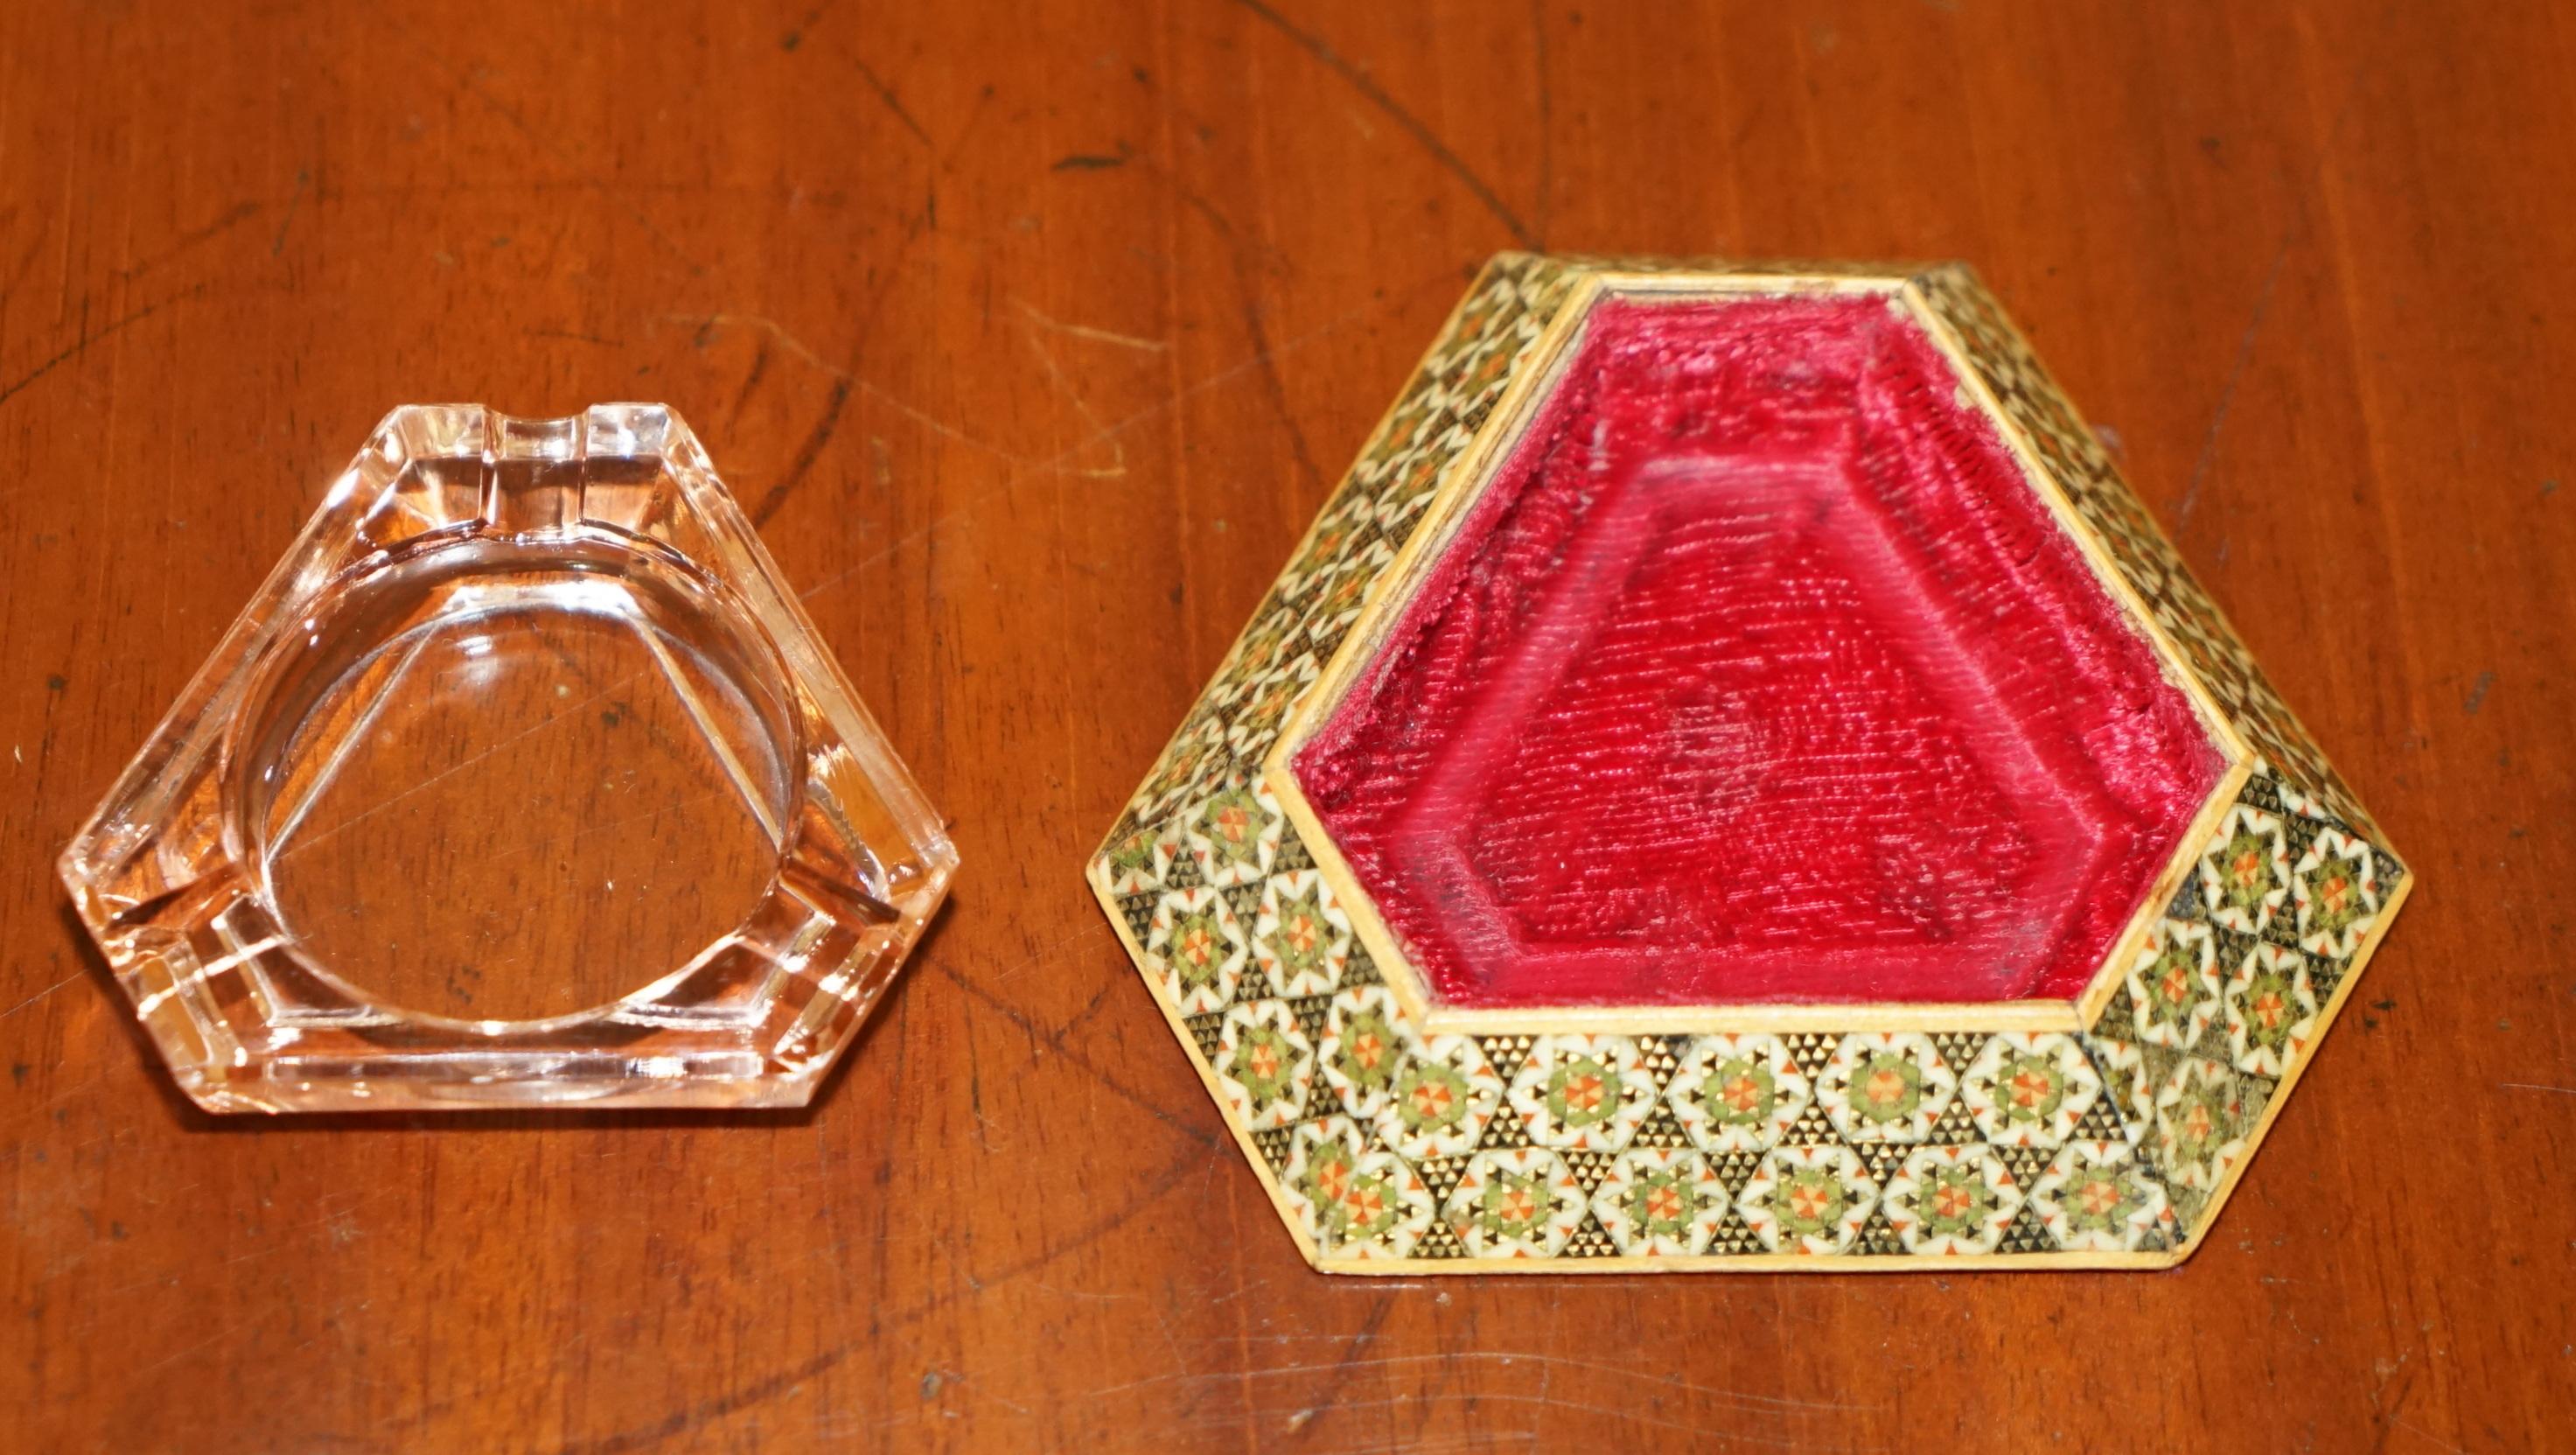 ANTIQUE PERSIAN ASHTRAY WiTH CRANBERRY GLASS TRIANGLE INTERNAL TRAY (20. Jahrhundert) im Angebot